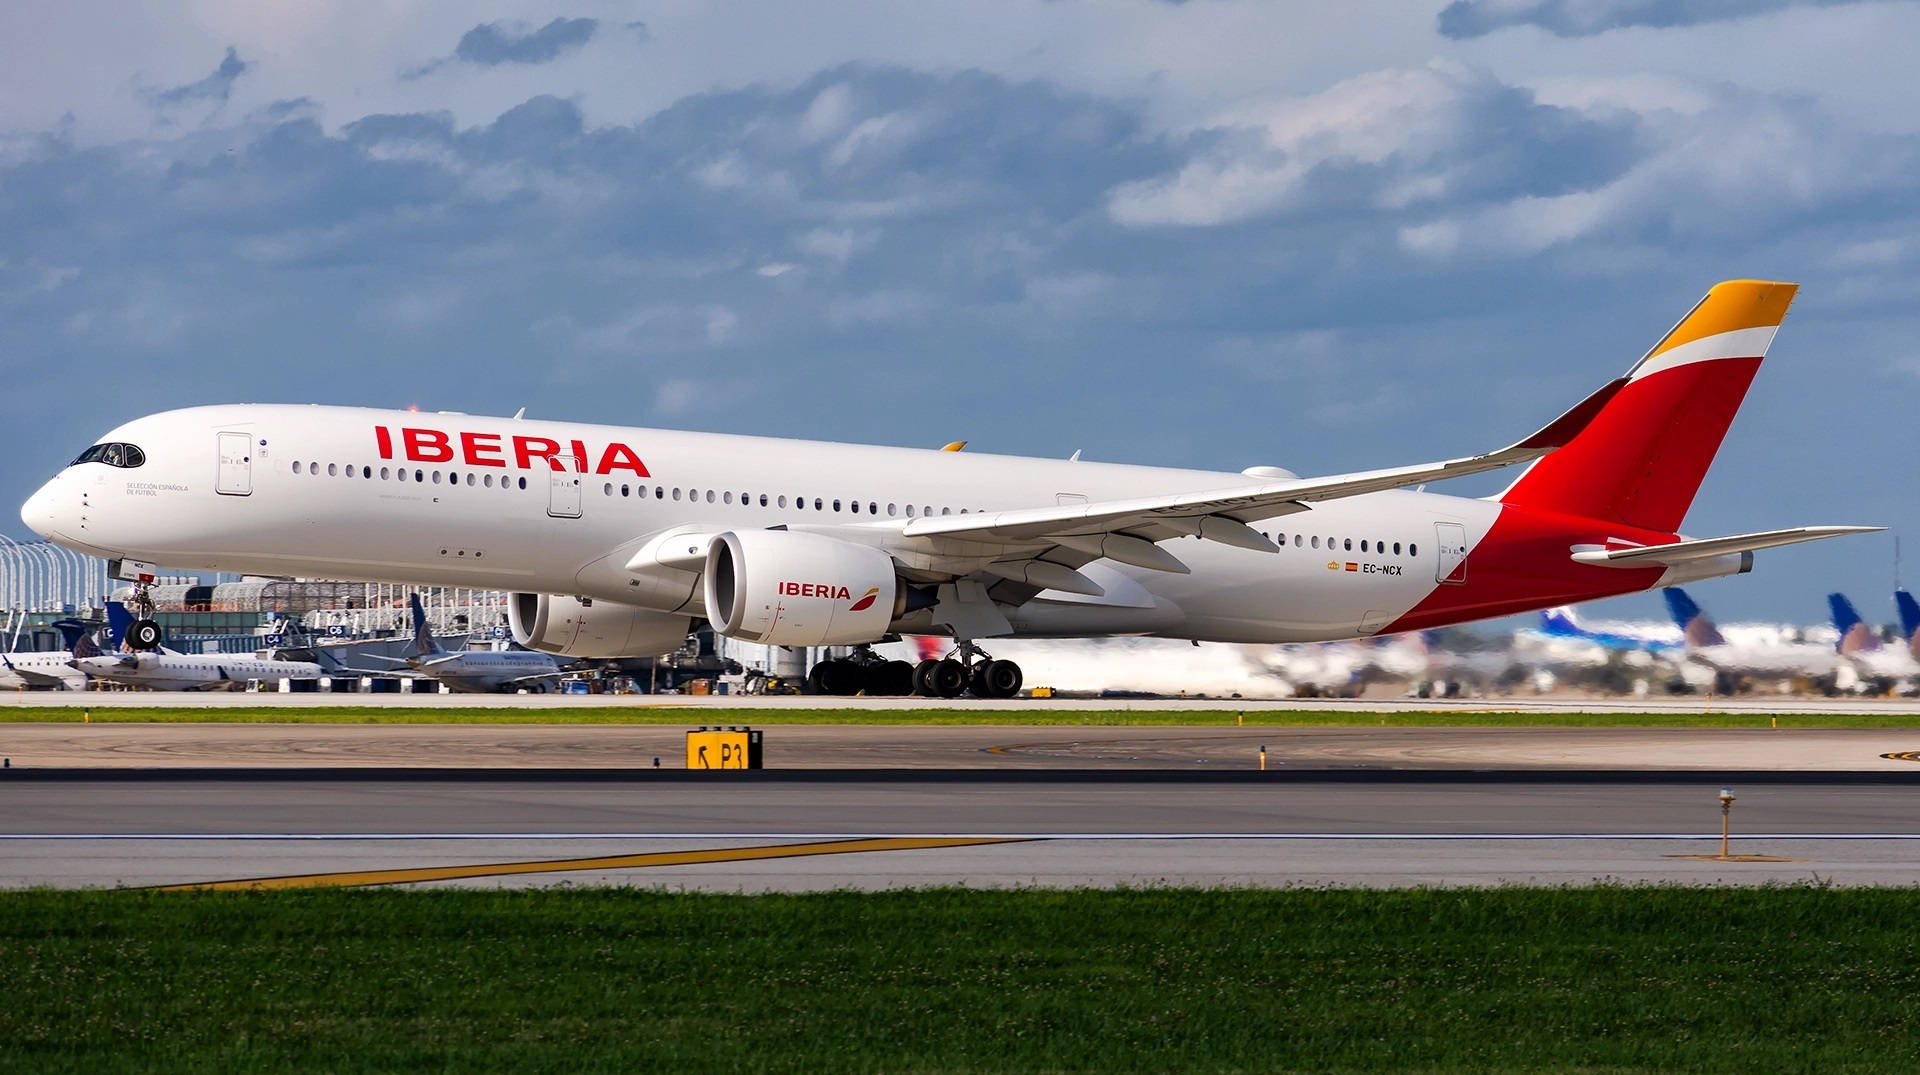 Iberia Airlines Airplanes On Busy Airport Wallpaper